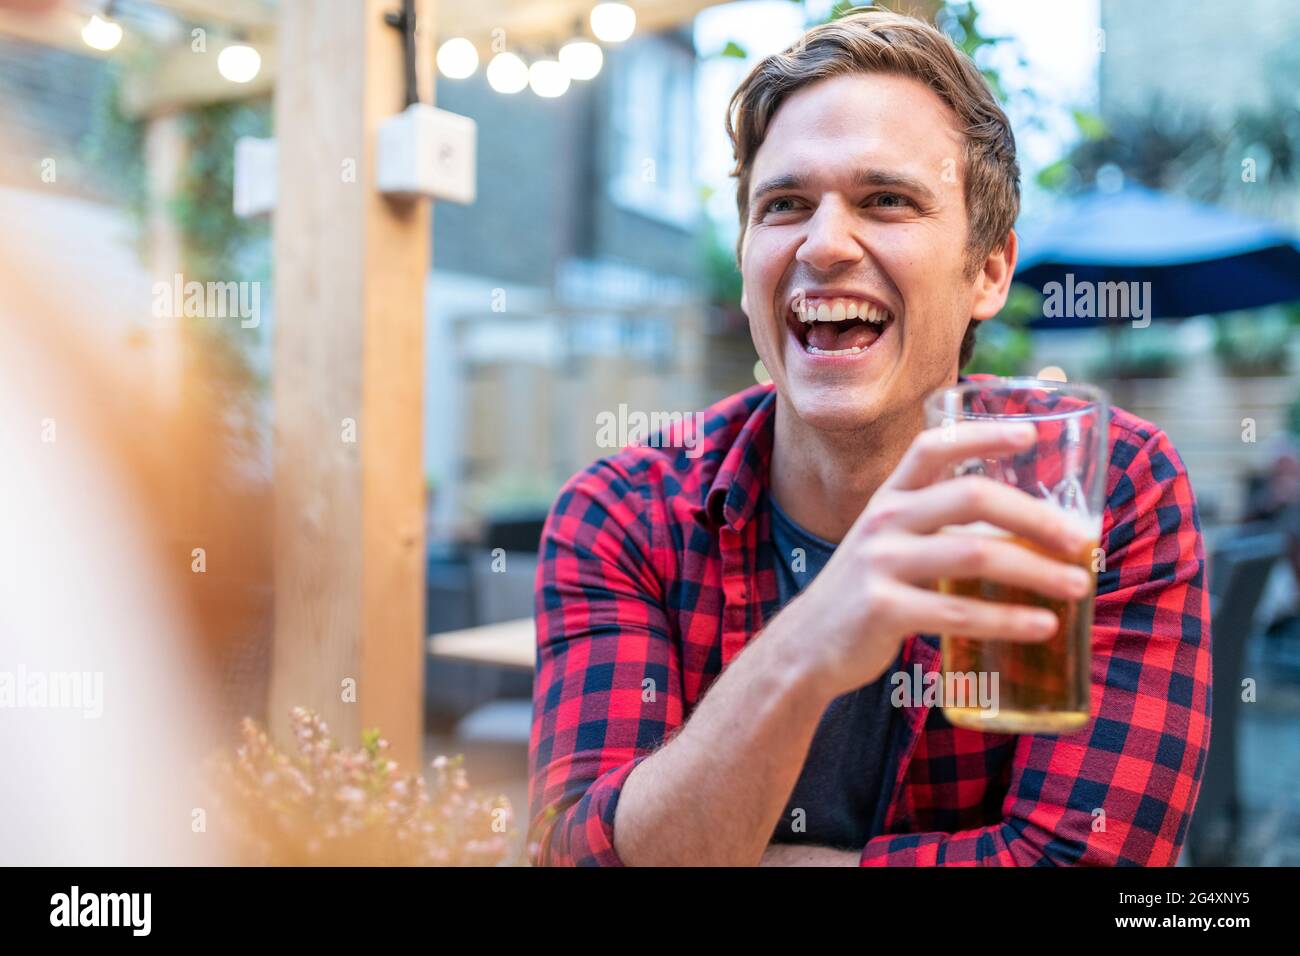 Man laughing while holding beer glass at pub Stock Photo